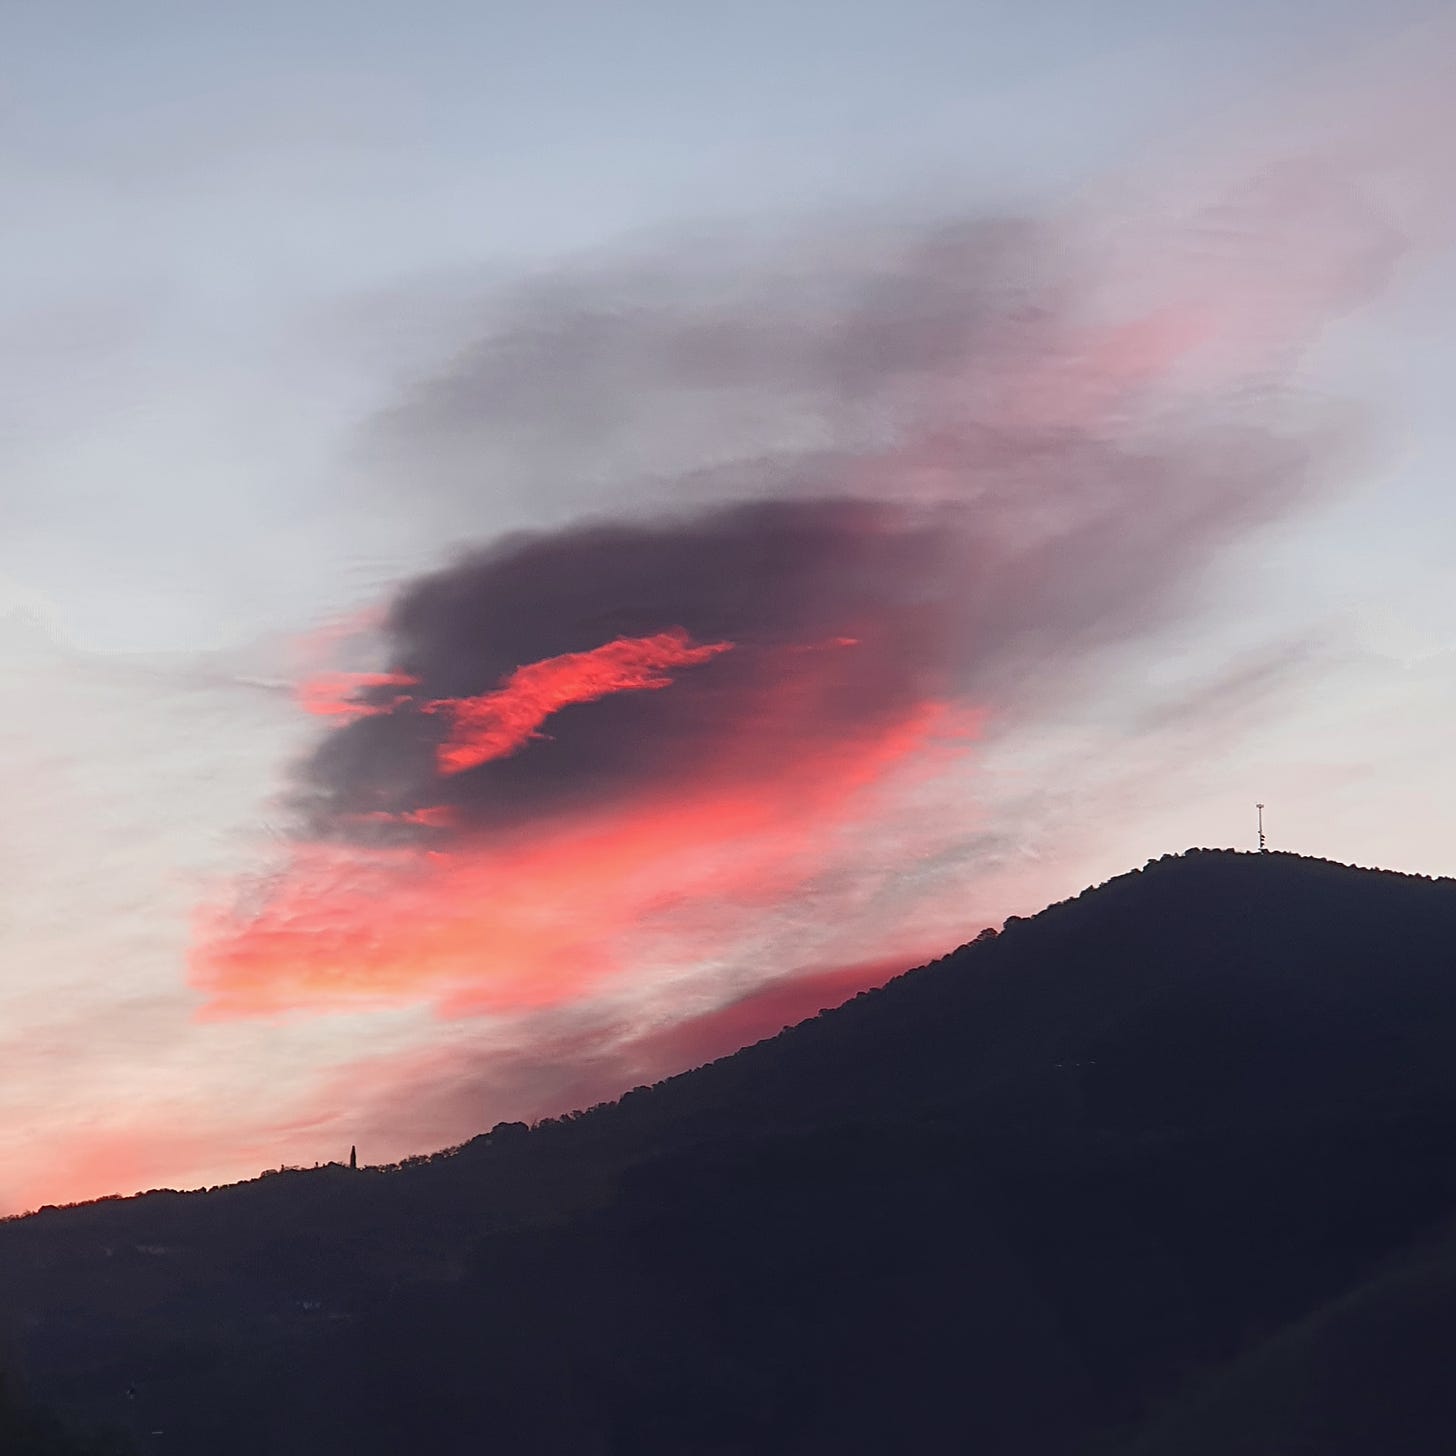 Ragged lenticular cloud mass in hues of brilliant pink and dark violet over low hills, lit from below by the rising sun.